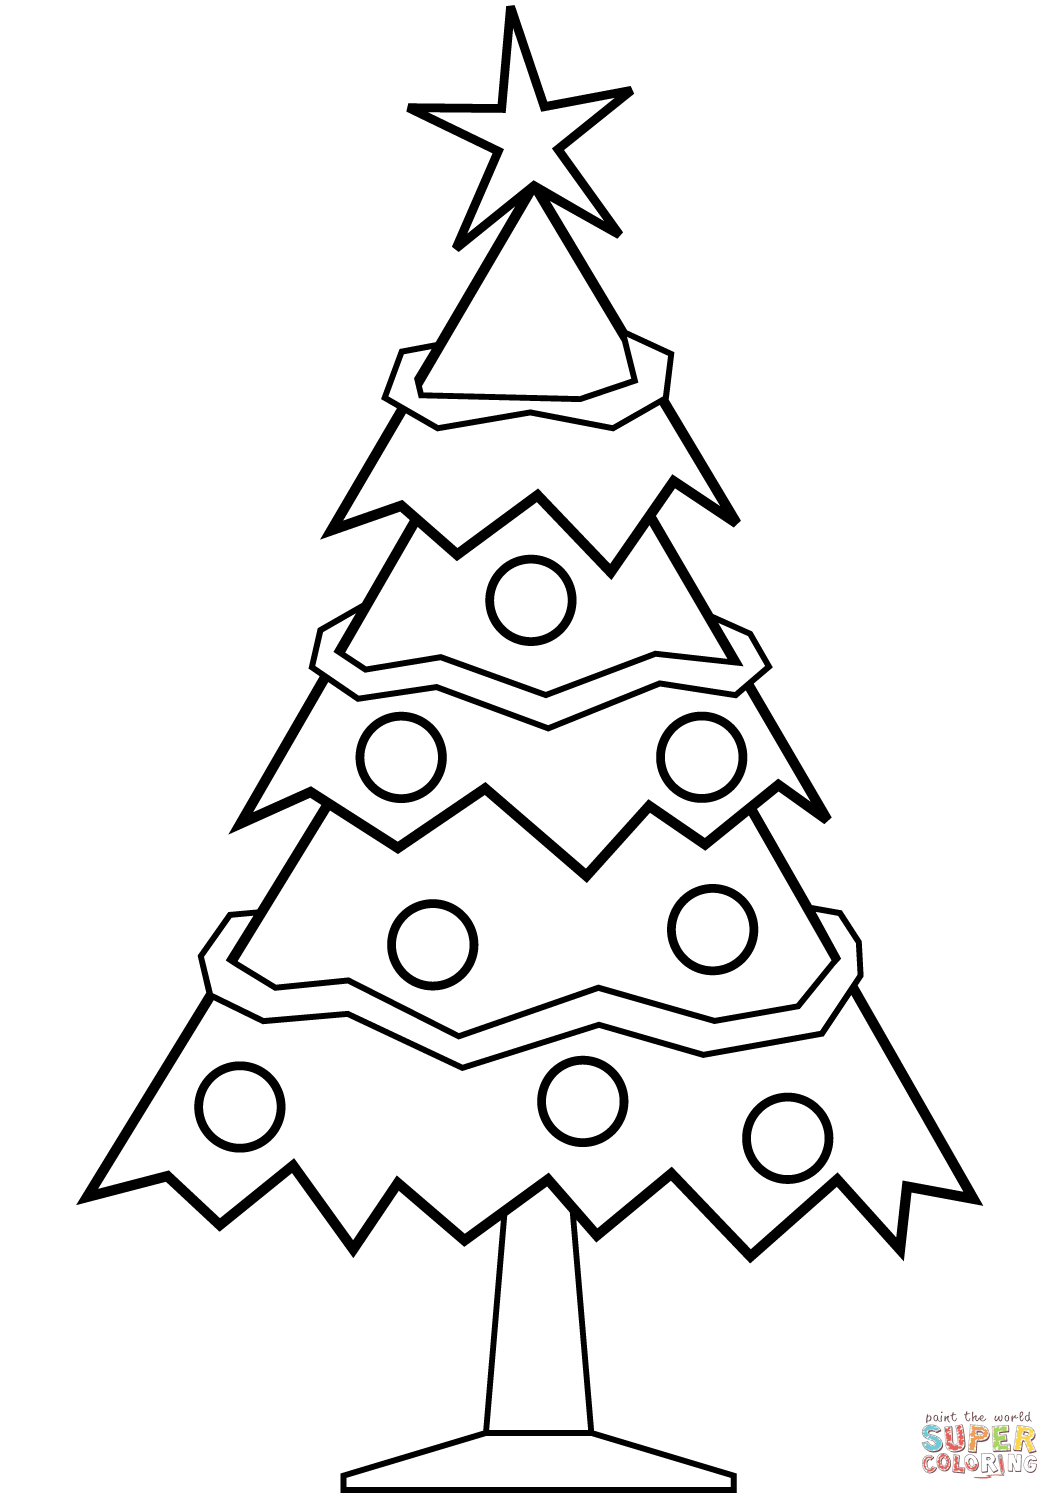 Simple christmas tree coloring page free printable coloring pages